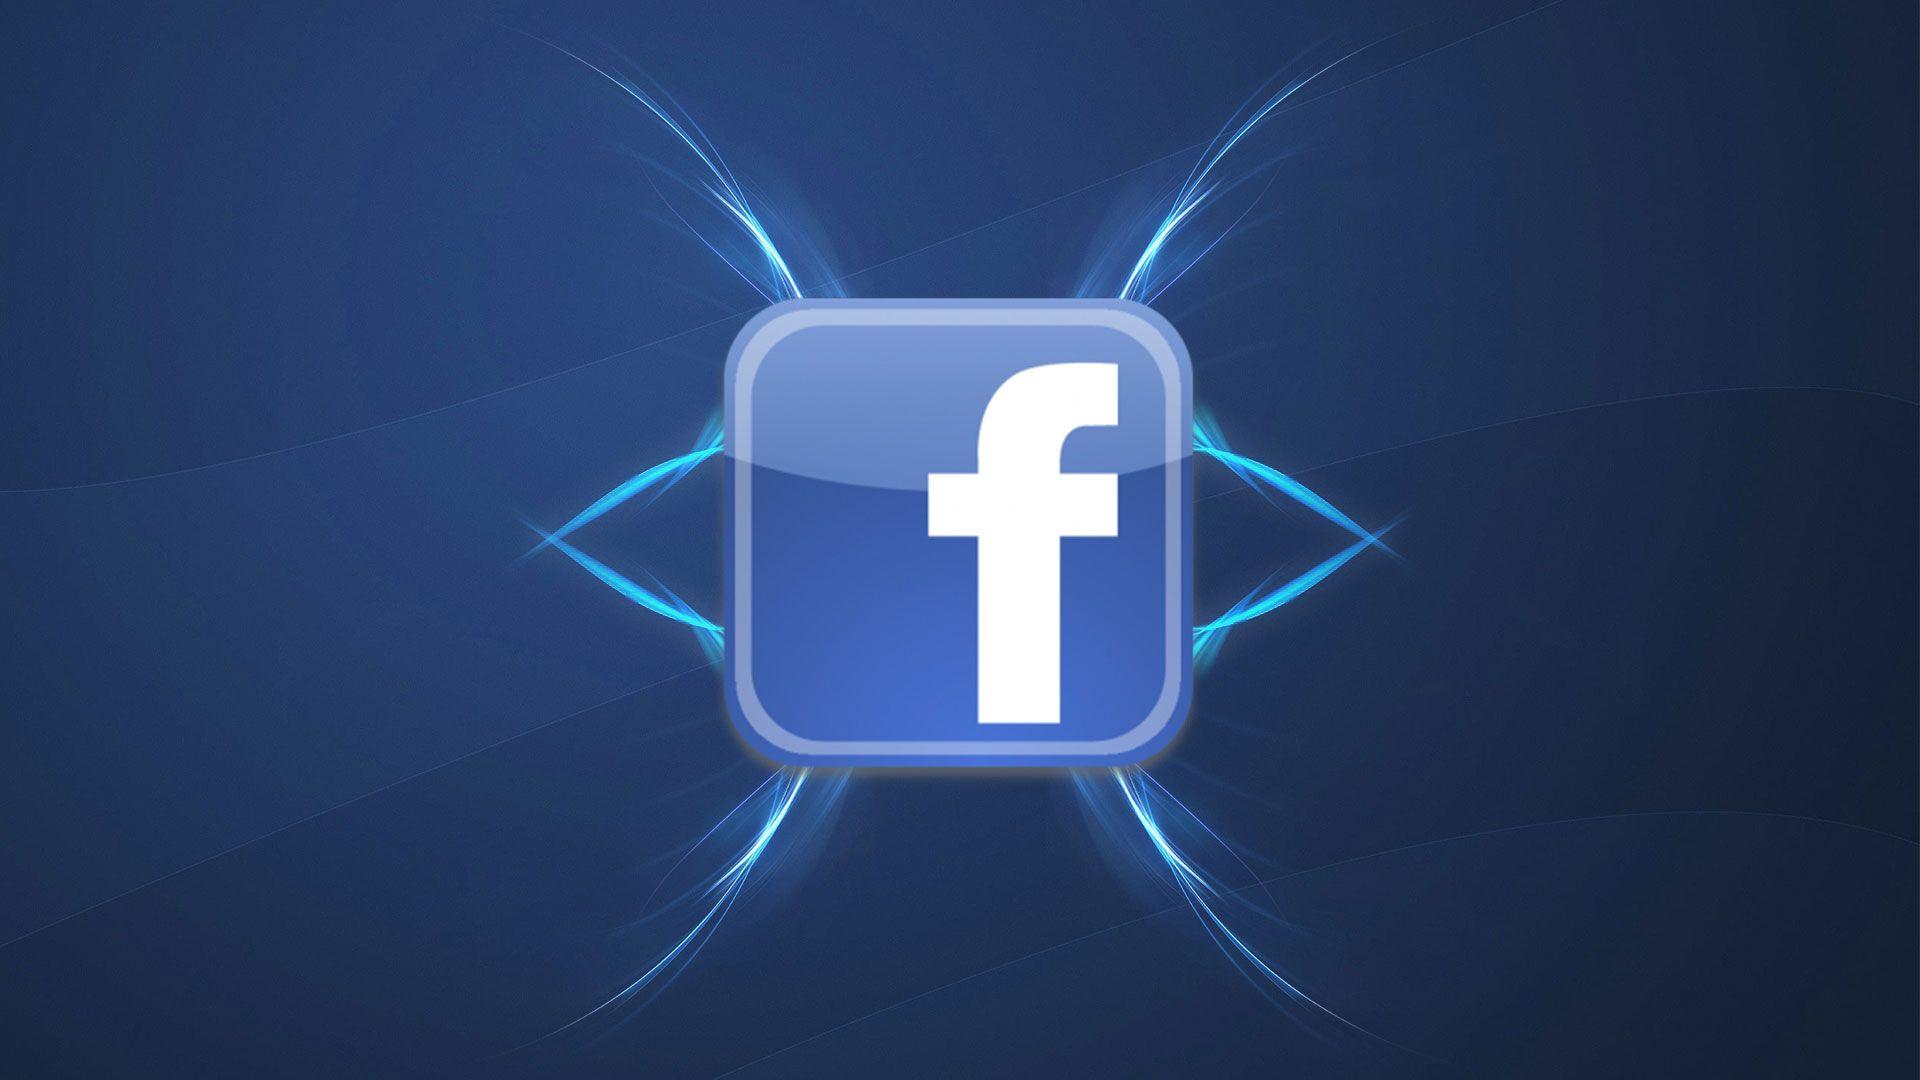 Facebook Full HD Wallpaper and Background Imagex1080